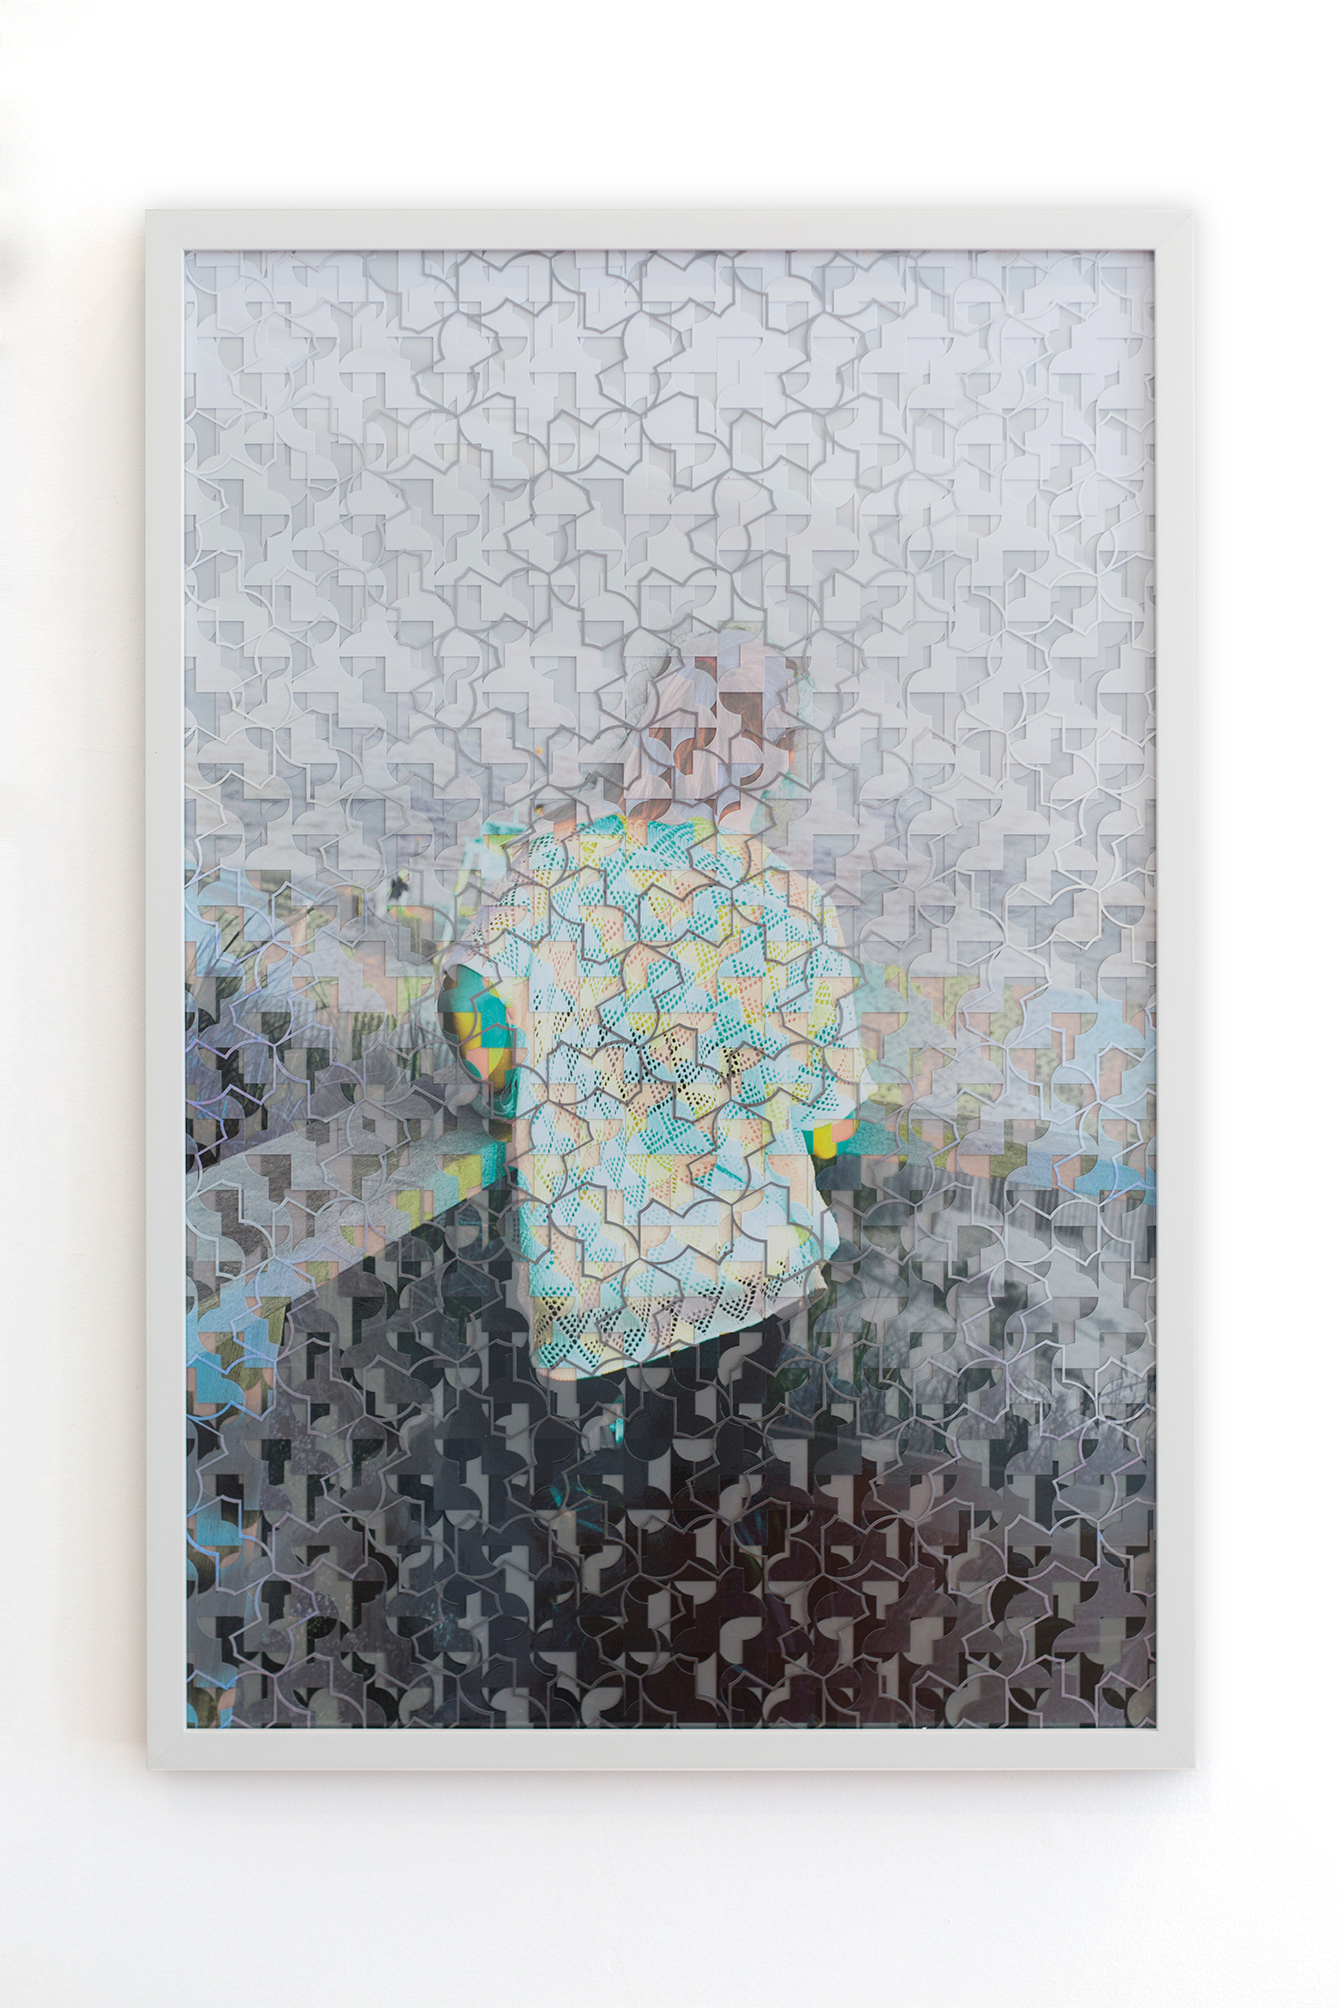 <p>Laura in Quogue_2016, 60 x 40cm, four layers of cut photographs</p>
